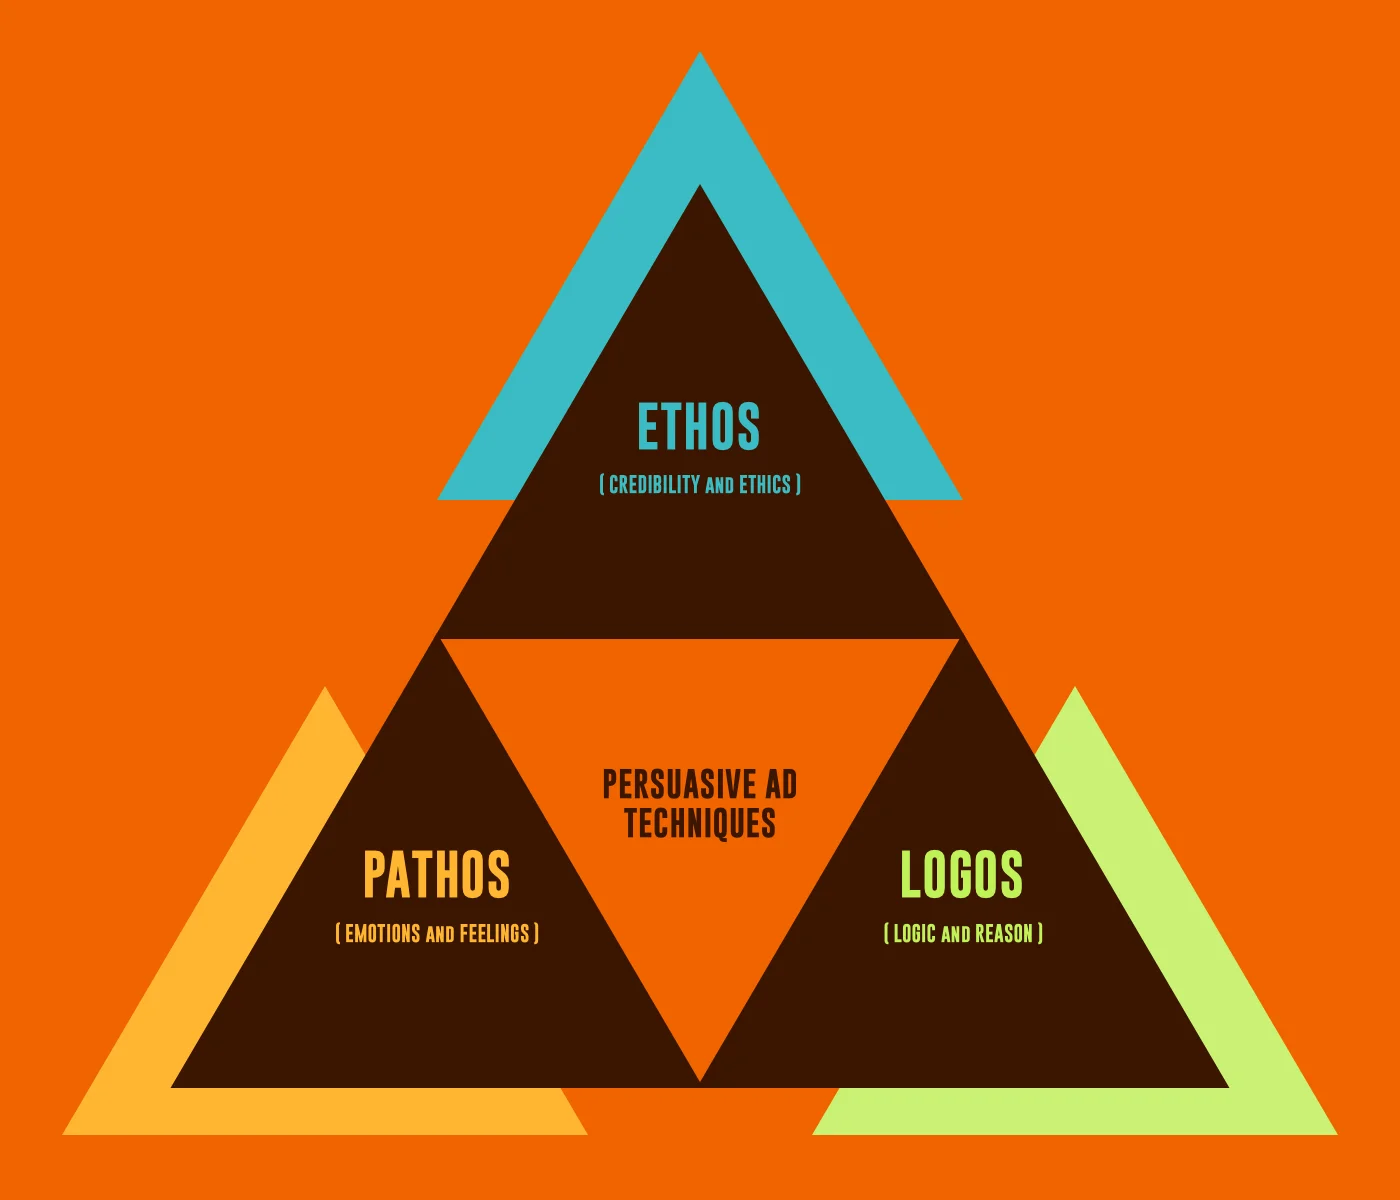 How to Make a Commercial by Mastering Persuasive Ads - Logos Ethos Pathos Rhetorical Triangle.